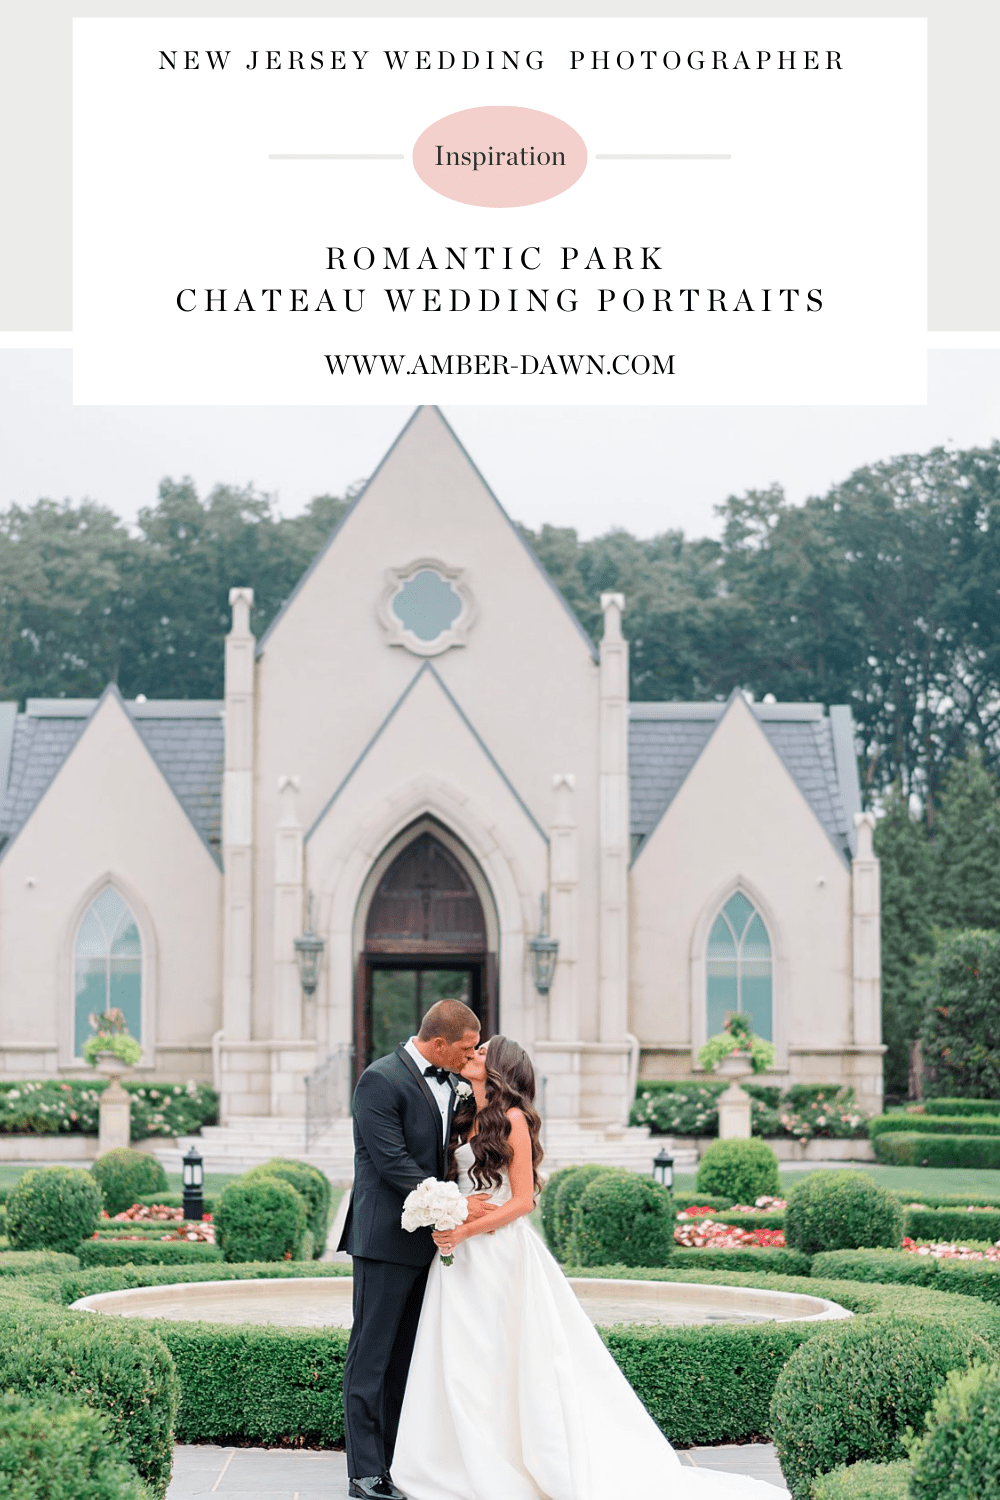 Elegant  Park Chateau Wedding in New Jersey photographed by NJ wedding photographer Amber Dawn Photography